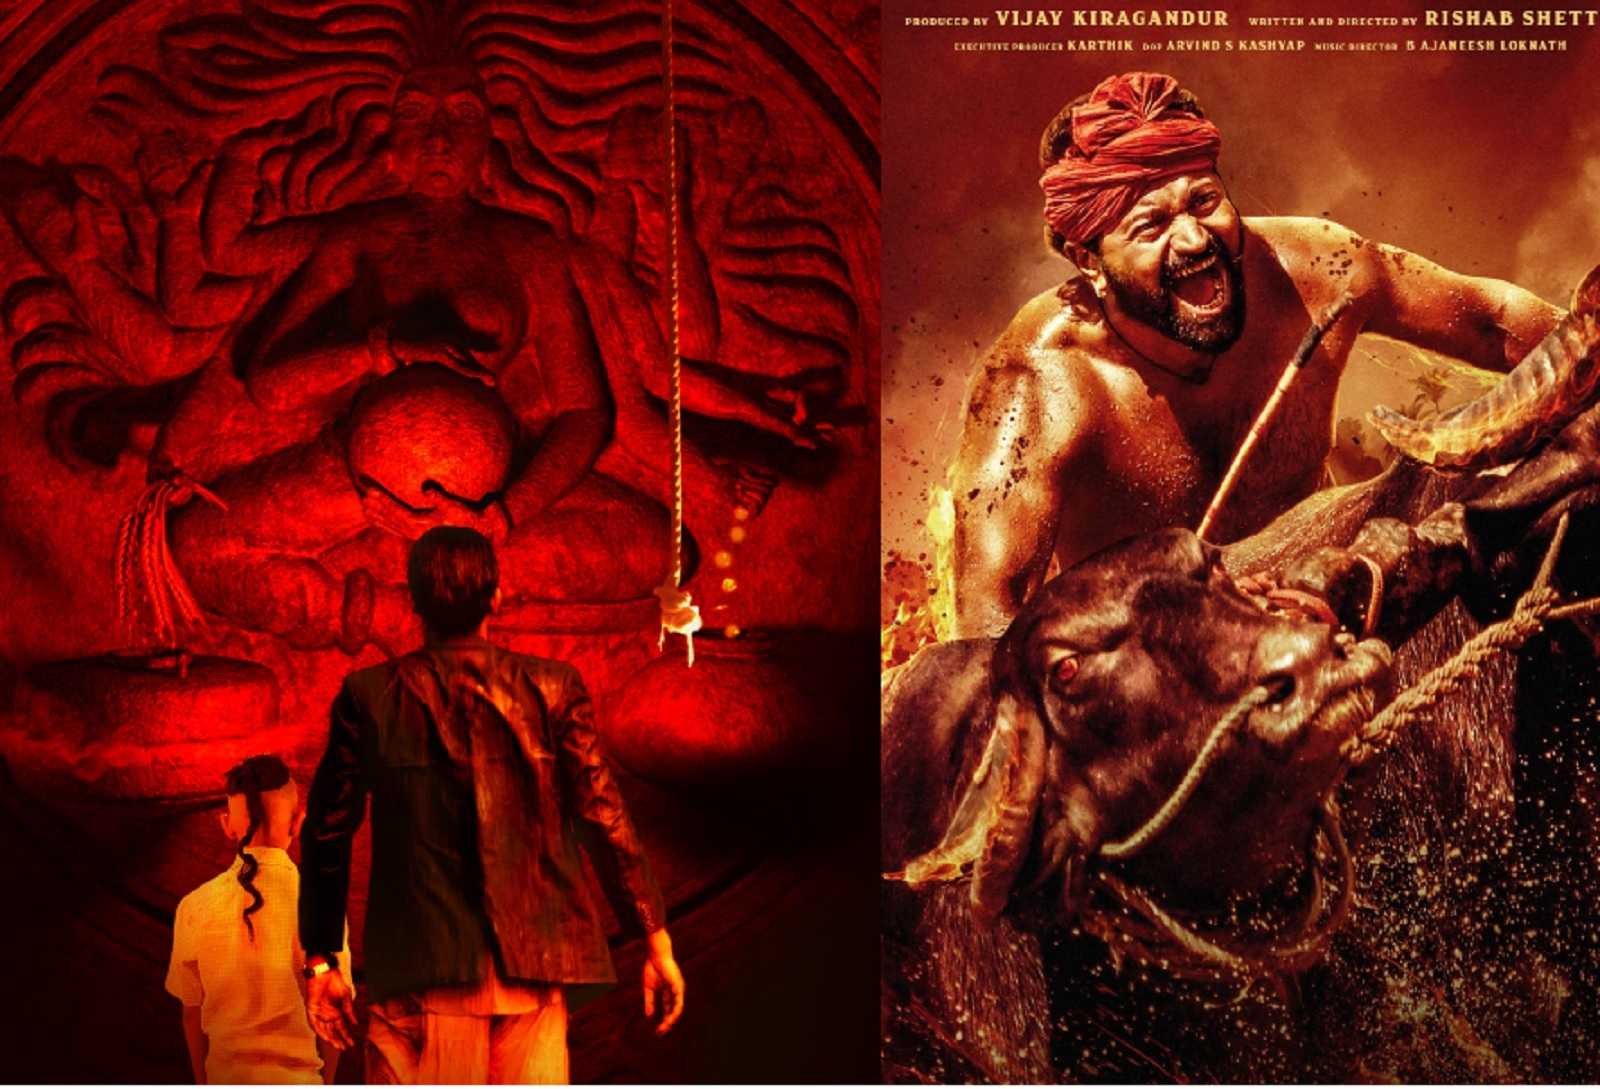 'Is this another North vs South debate?' : Netizens react after Anand Gandhi's tweet triggered Kantara and Tumbbad's comparison